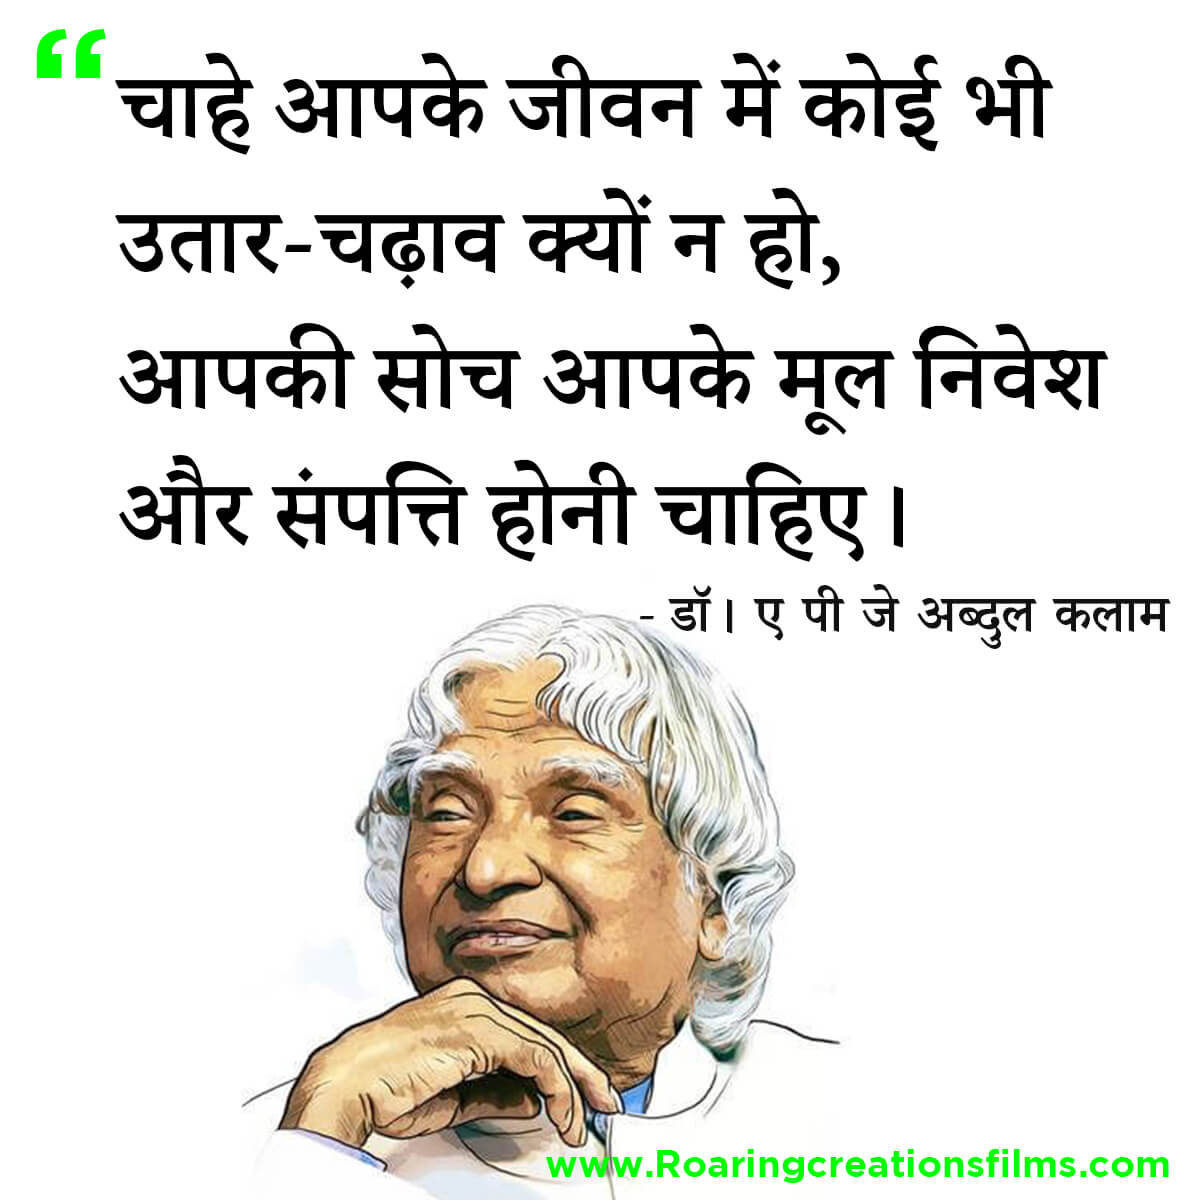 Best Quotes of Dr. A.P.J. Abdul Kalam in Hindi